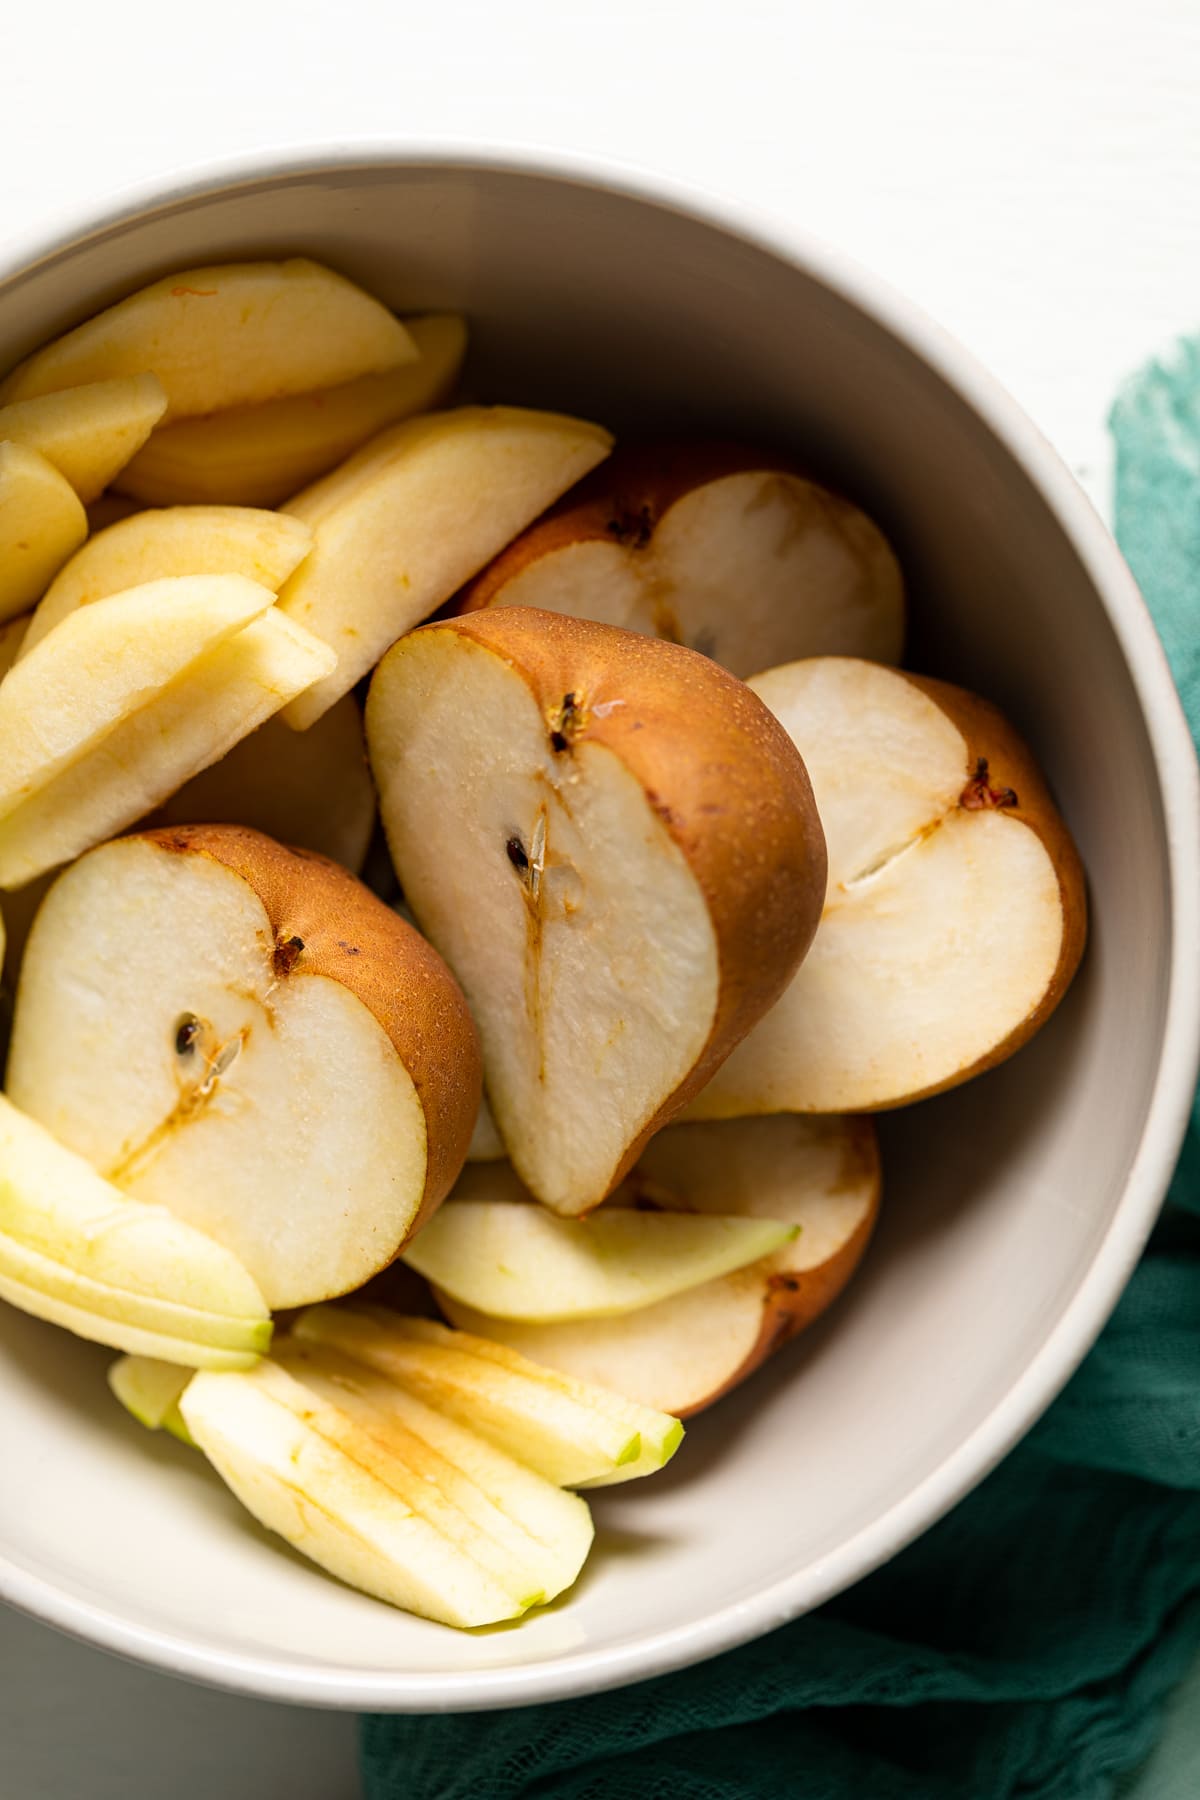 Bowl of pear halves and slices